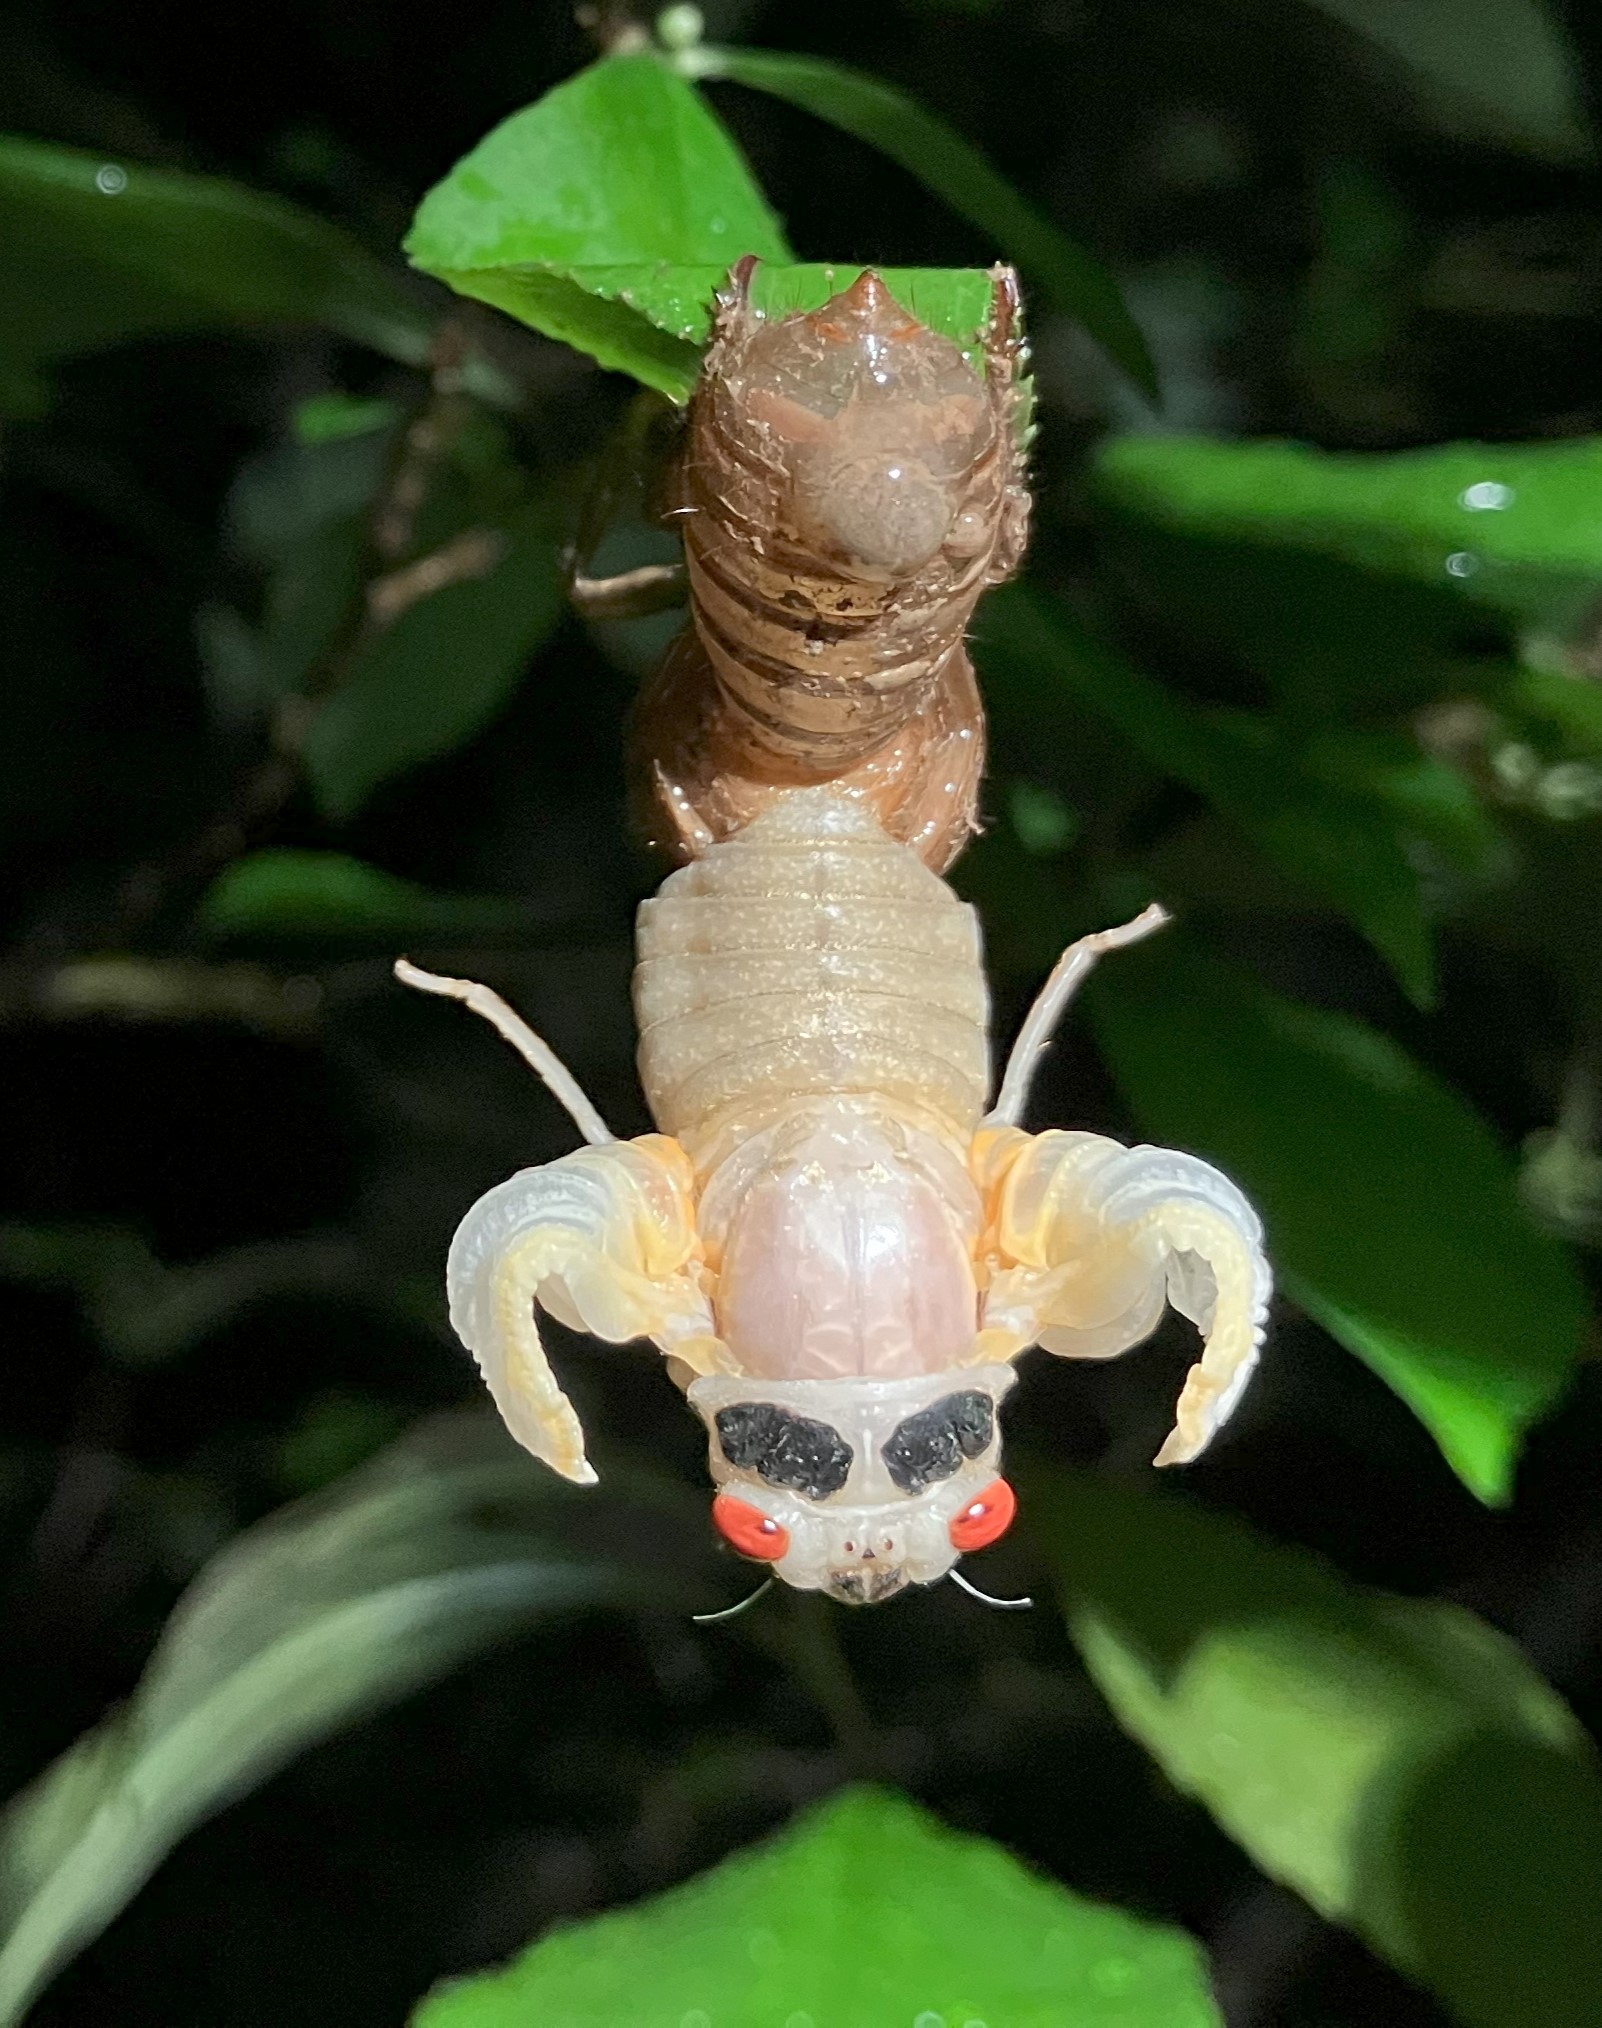 The emerging adult is hanging below its nymph exoskeleton. The wings are tiny and curled.